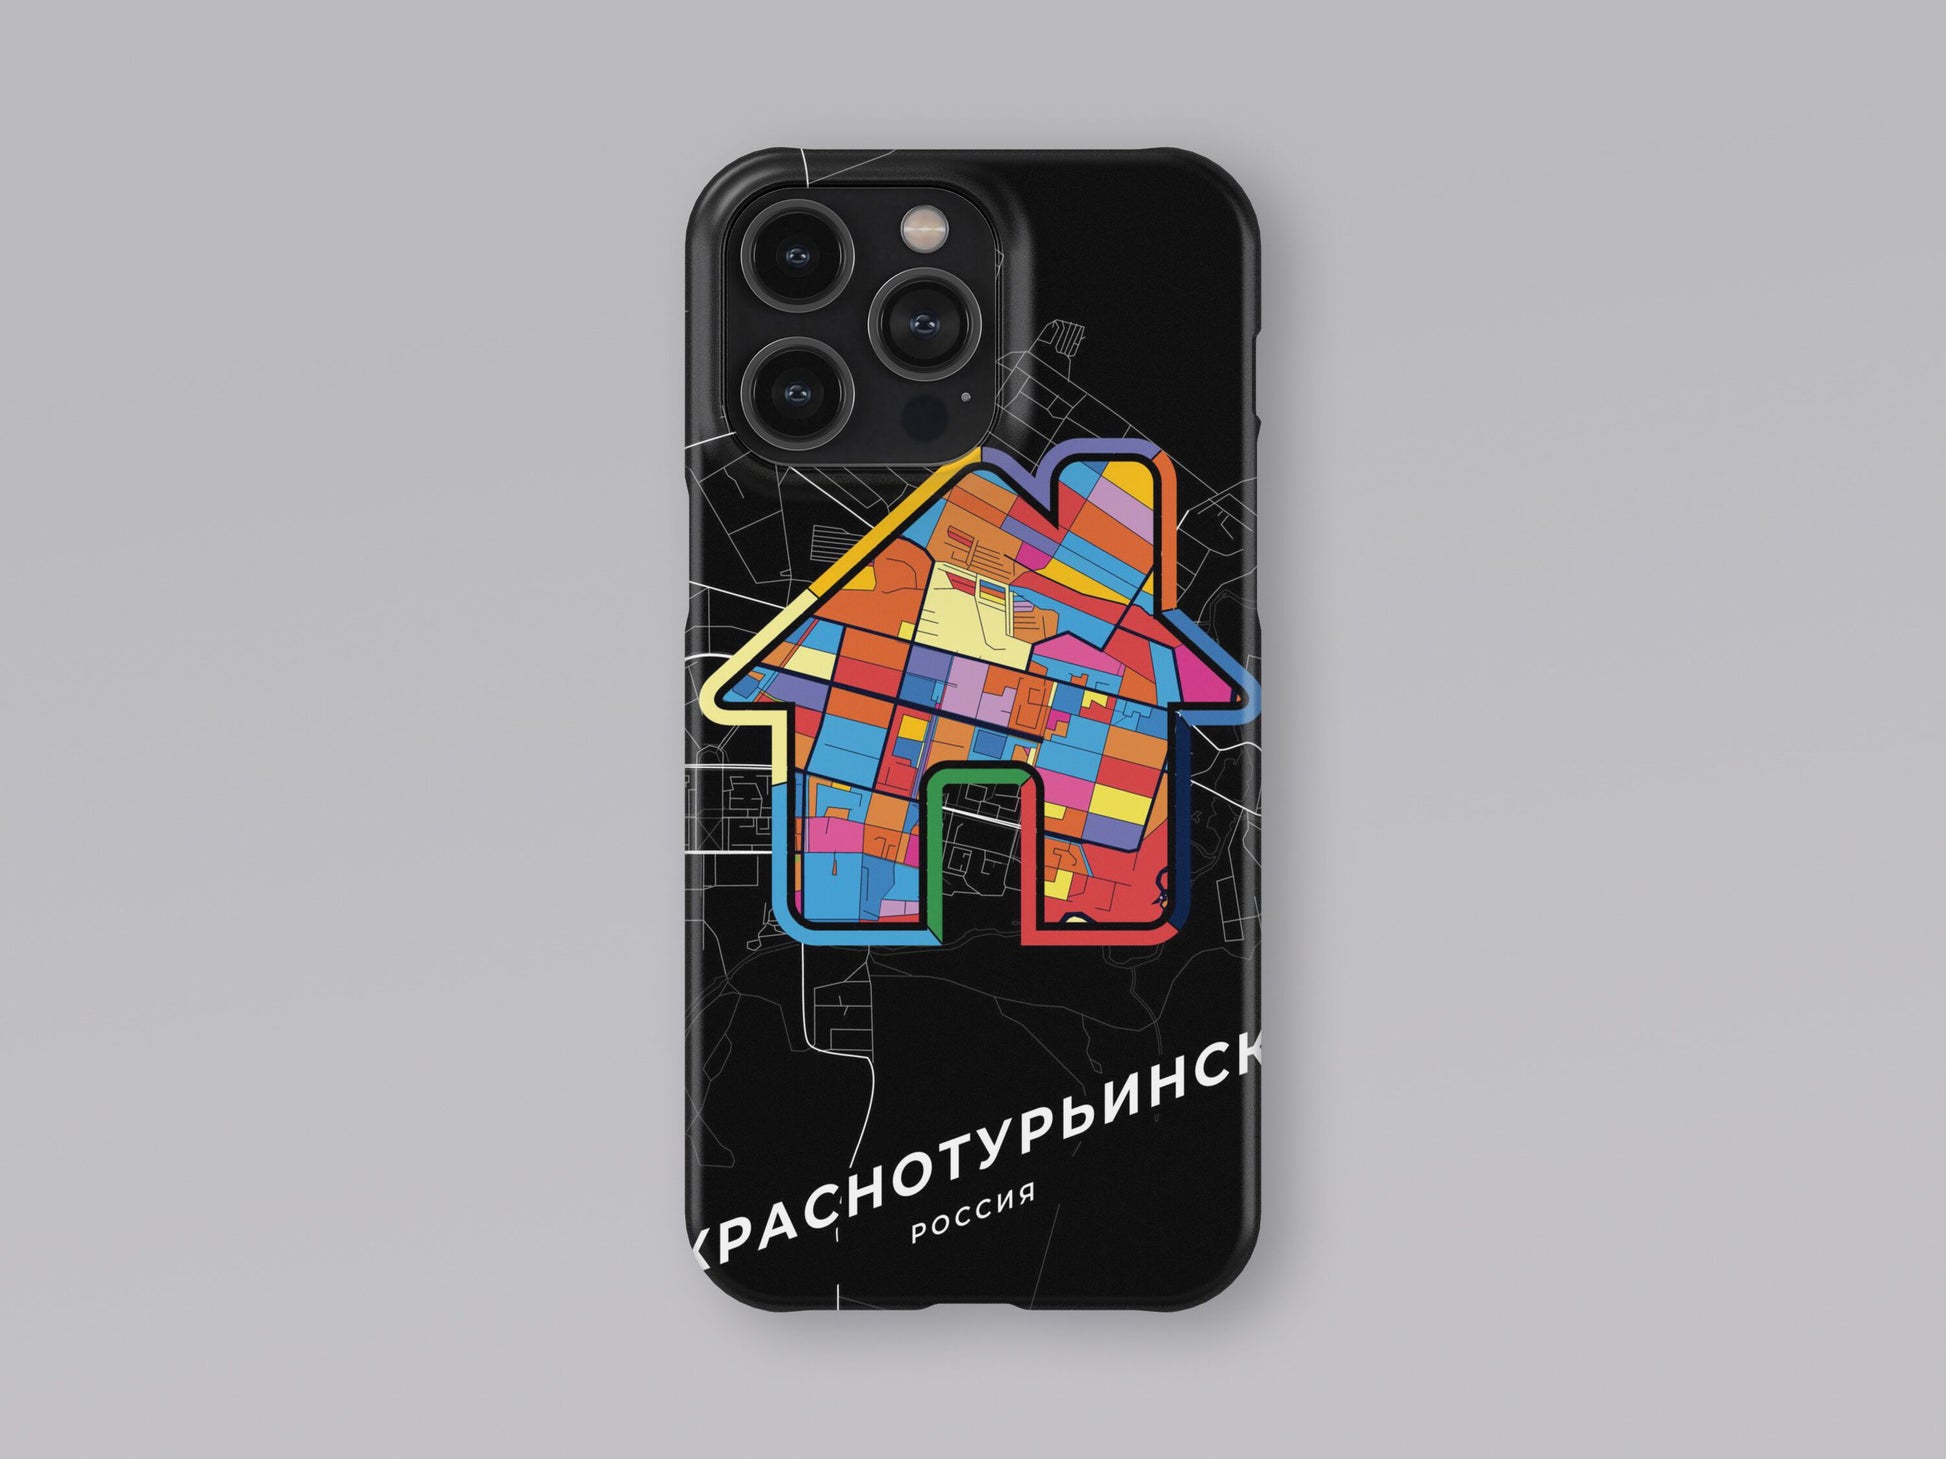 Krasnoturyinsk Russia slim phone case with colorful icon. Birthday, wedding or housewarming gift. Couple match cases. 3